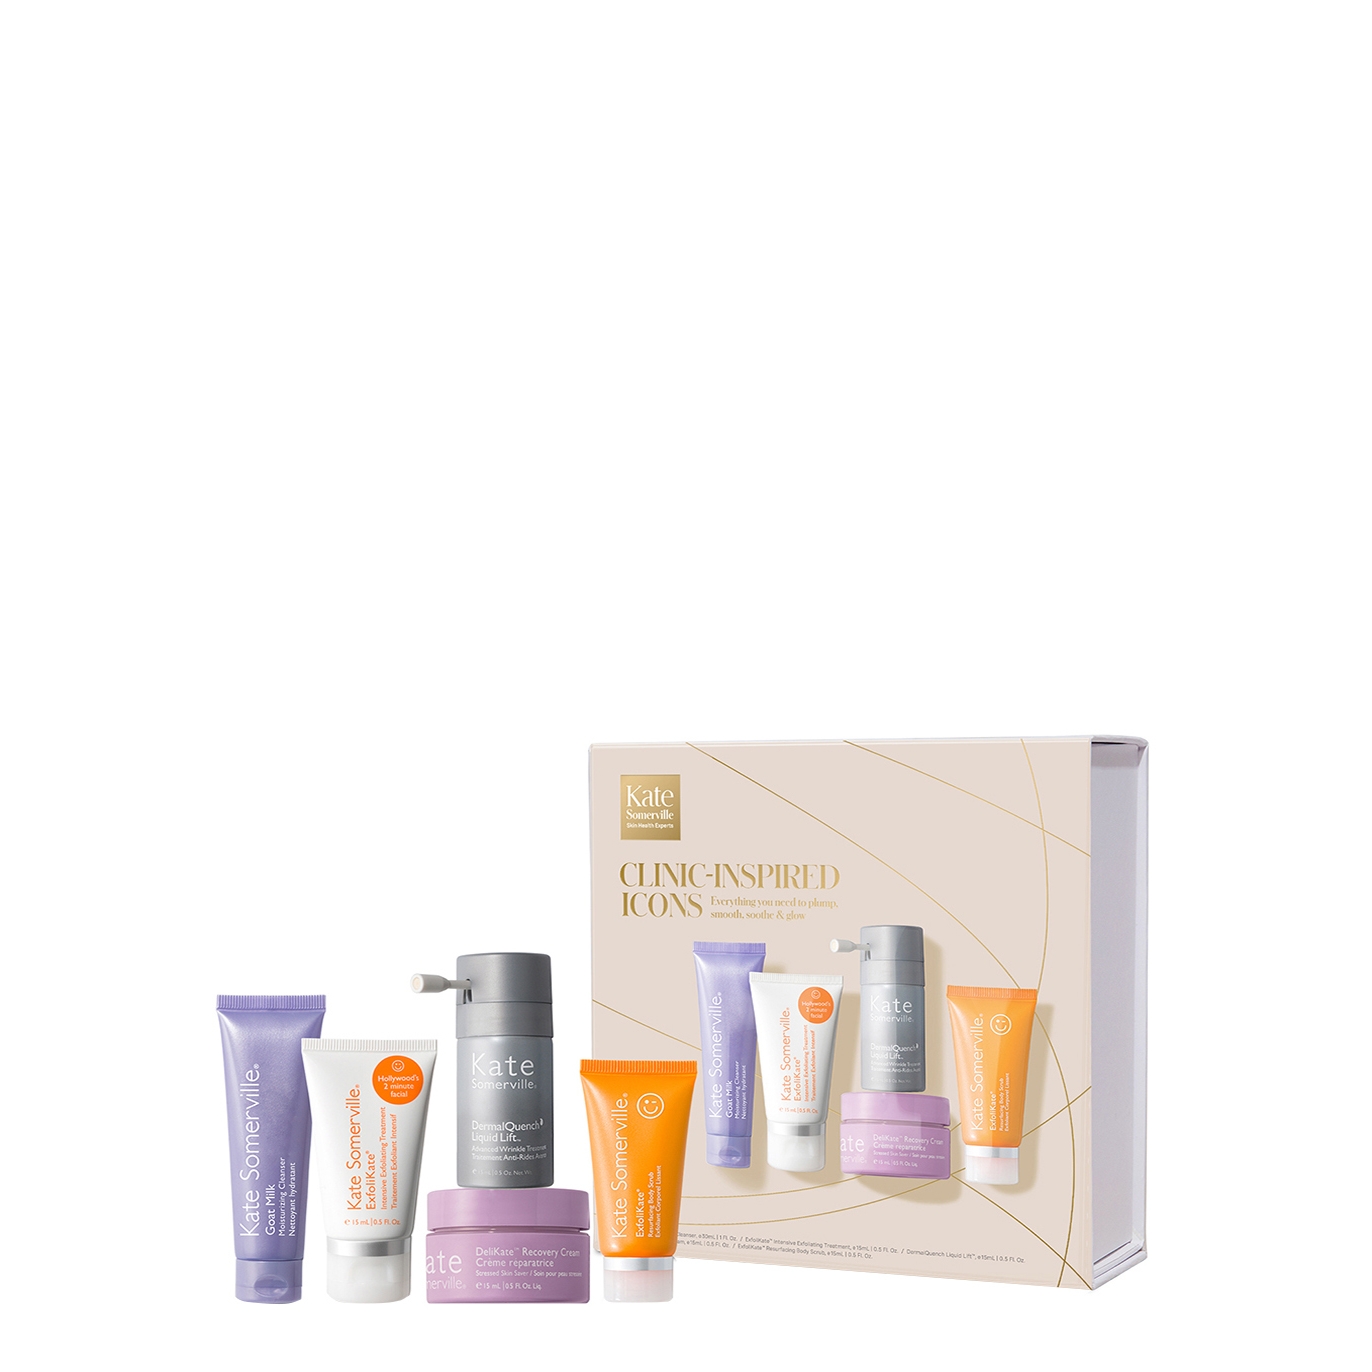 Kate Somerville Clinic Inspired Icons Gift Set